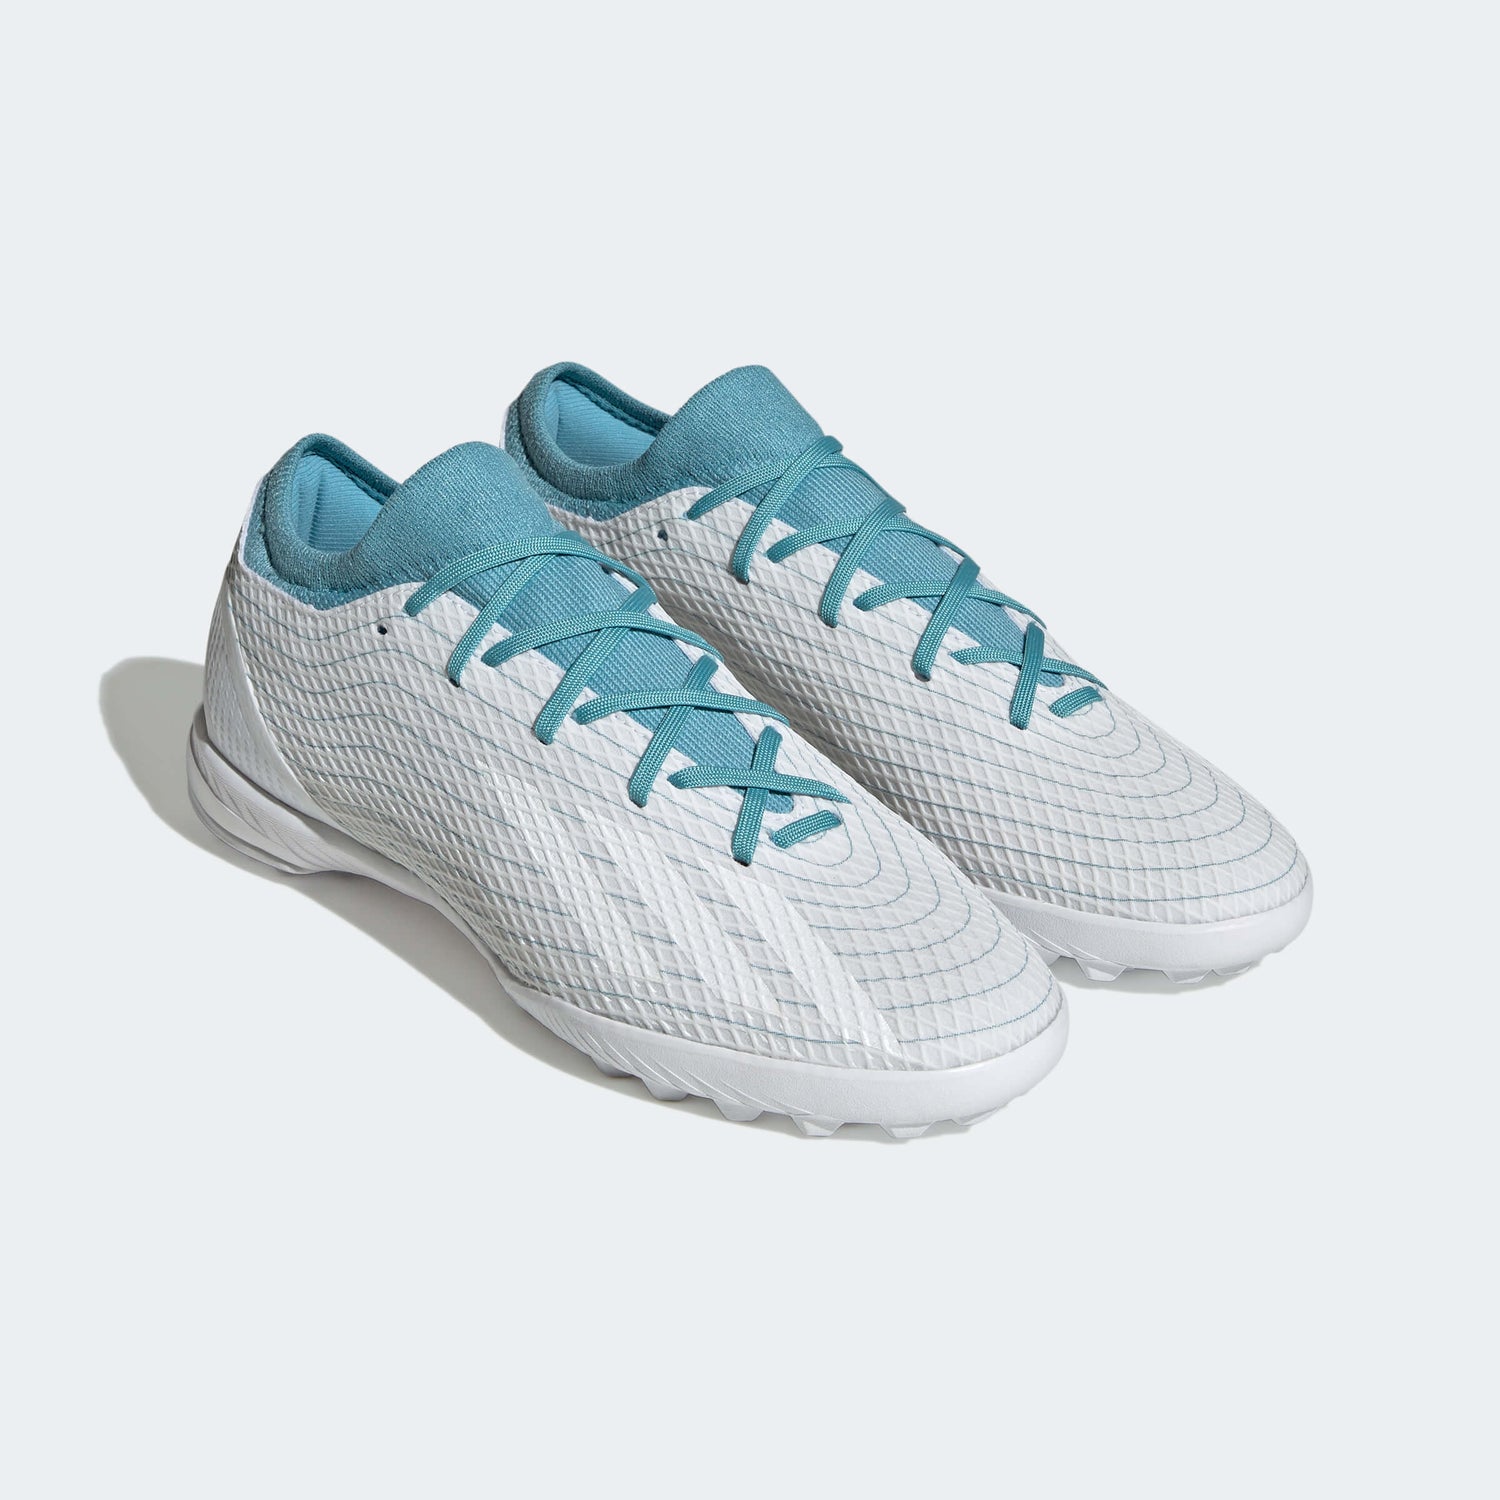 adidas X Speedportal.3 Turf - Parley Pack (SP23) (Pair - Front Lateral)